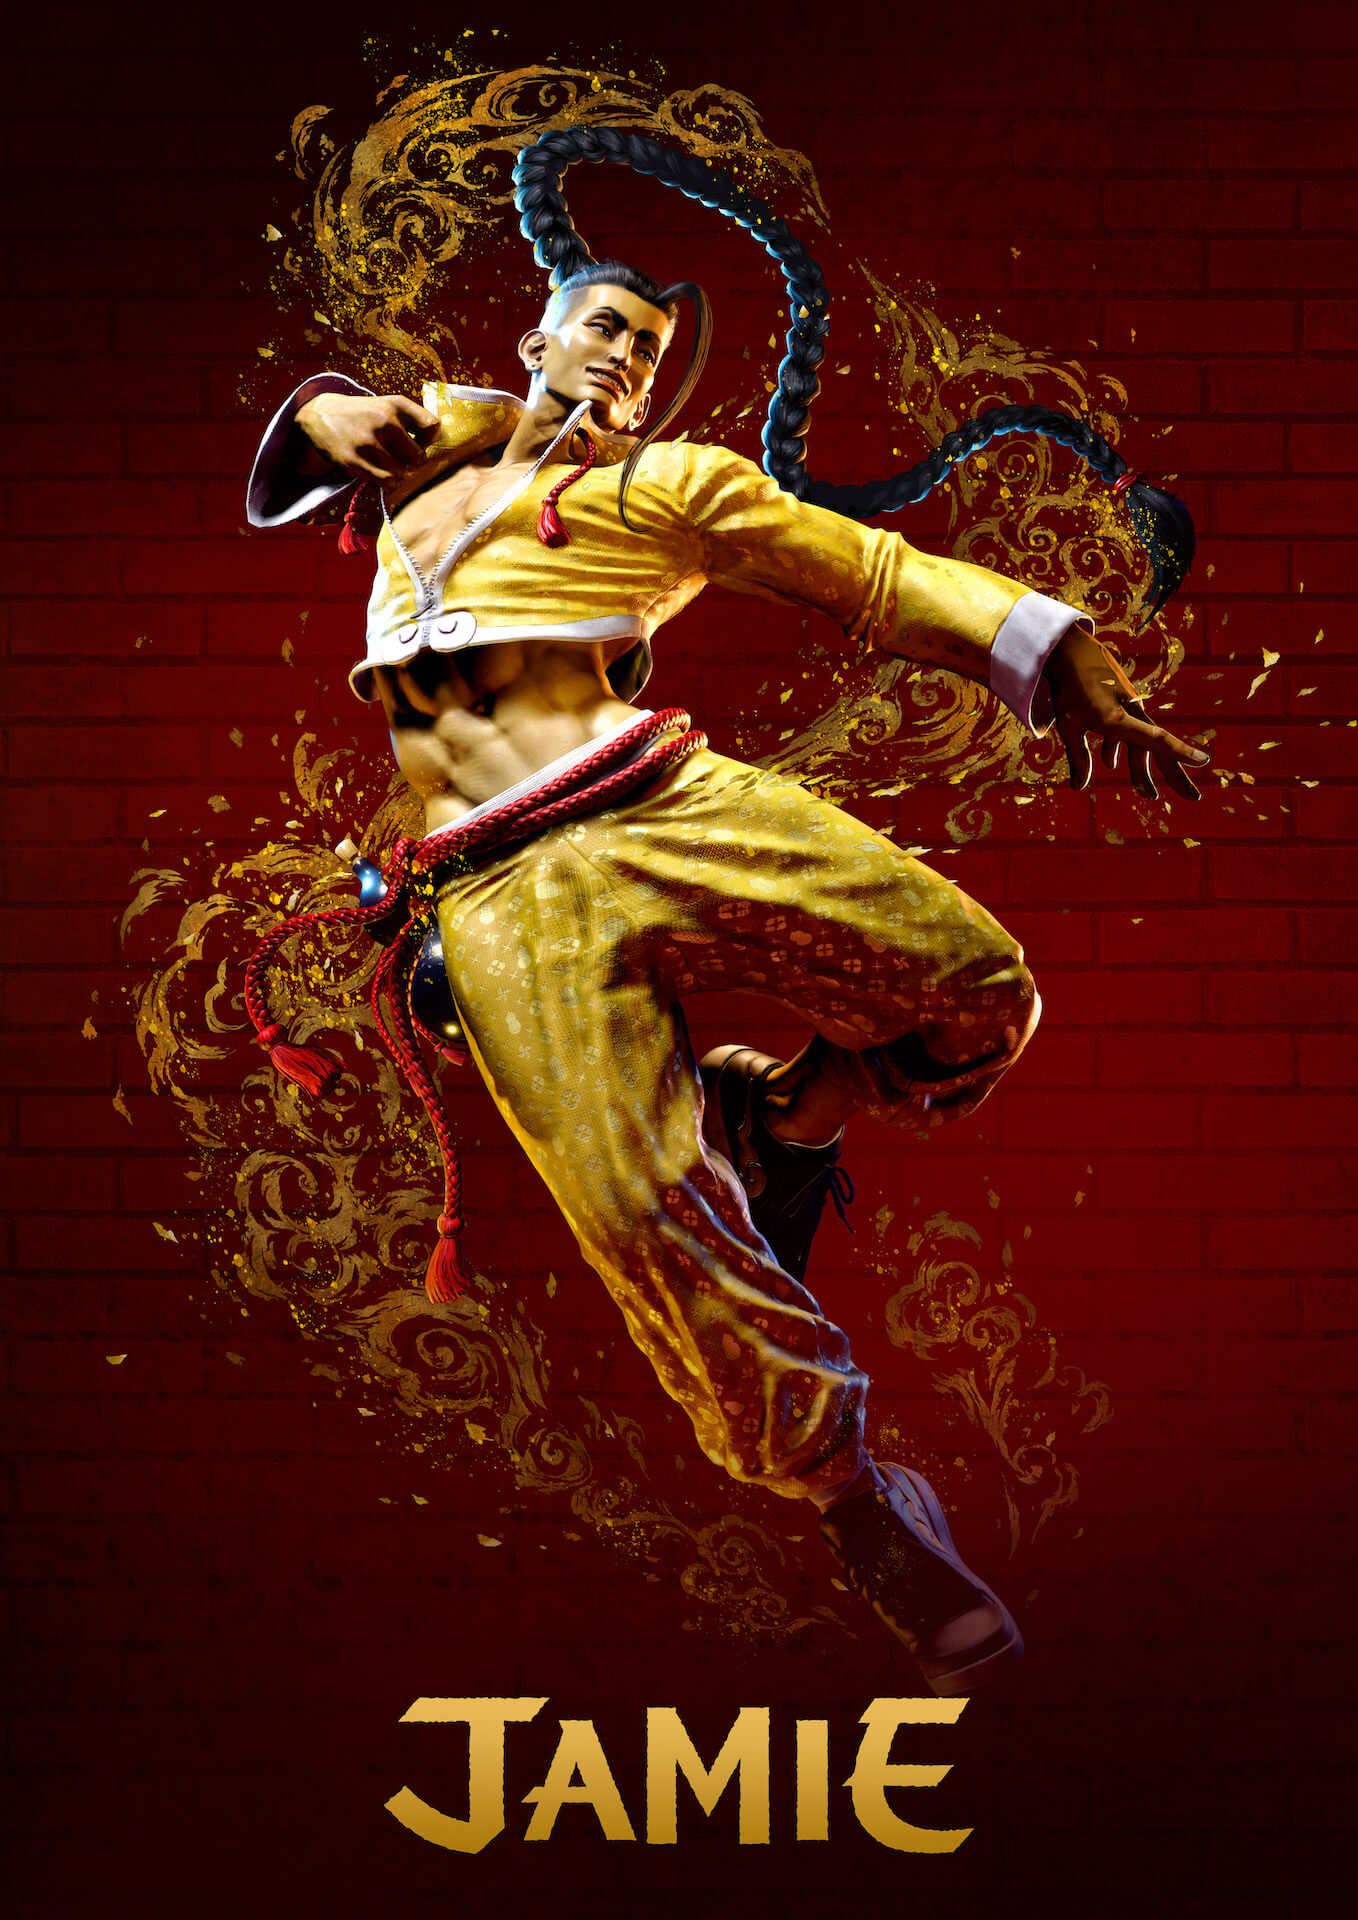 Guile PR & Advertising Material, Images, Street Fighter 6, Museum